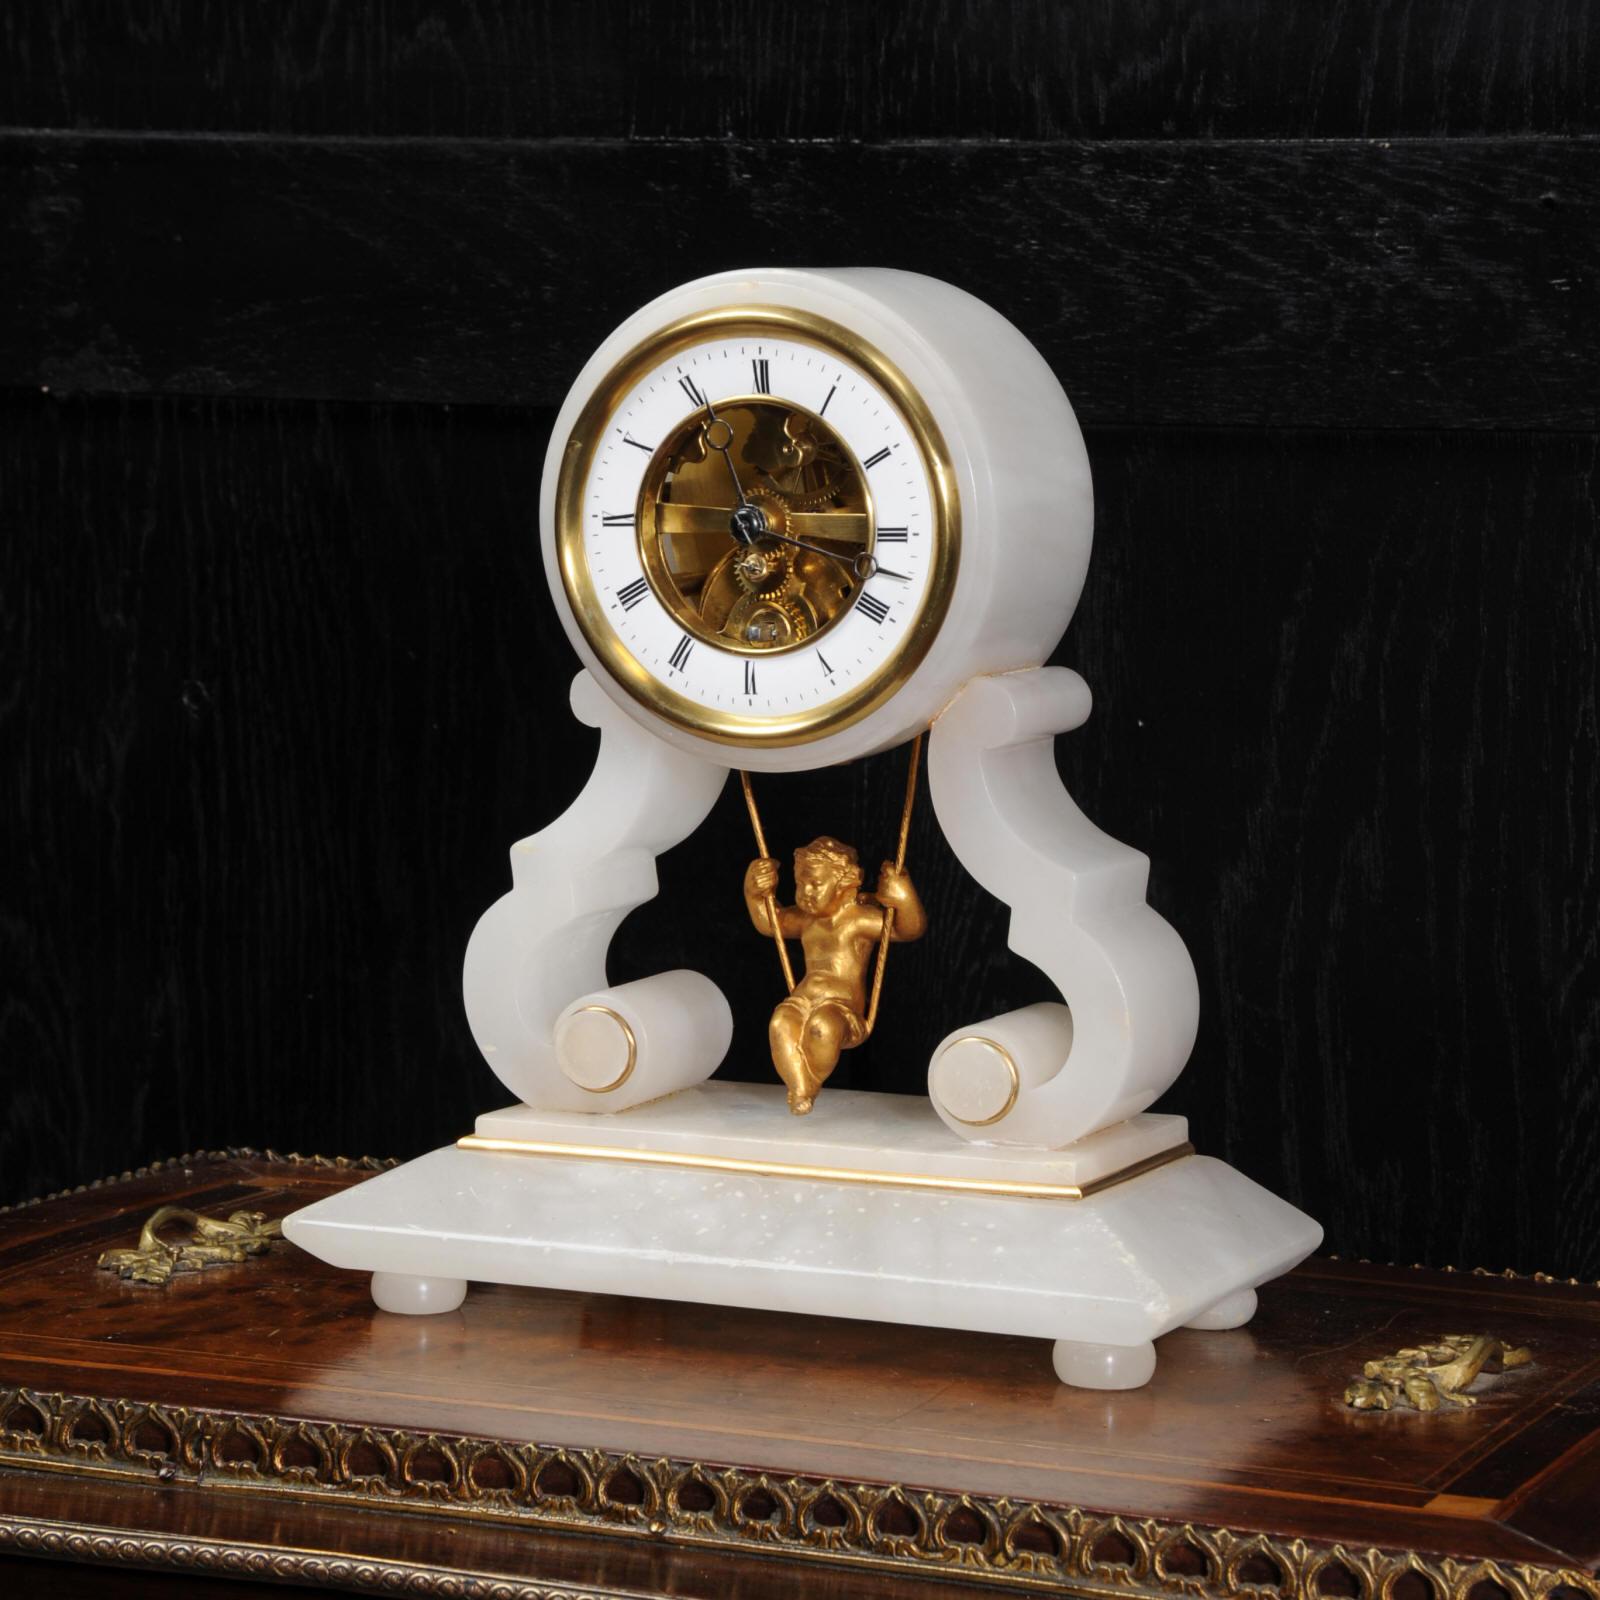 A super, rare original antique French clock featuring a cherub swinging back and forth as the pendulum. This is the Farcot version, the best one, patented by Farcot in 1862. It uses a double escapement with a half moon pallet to achieve the front to